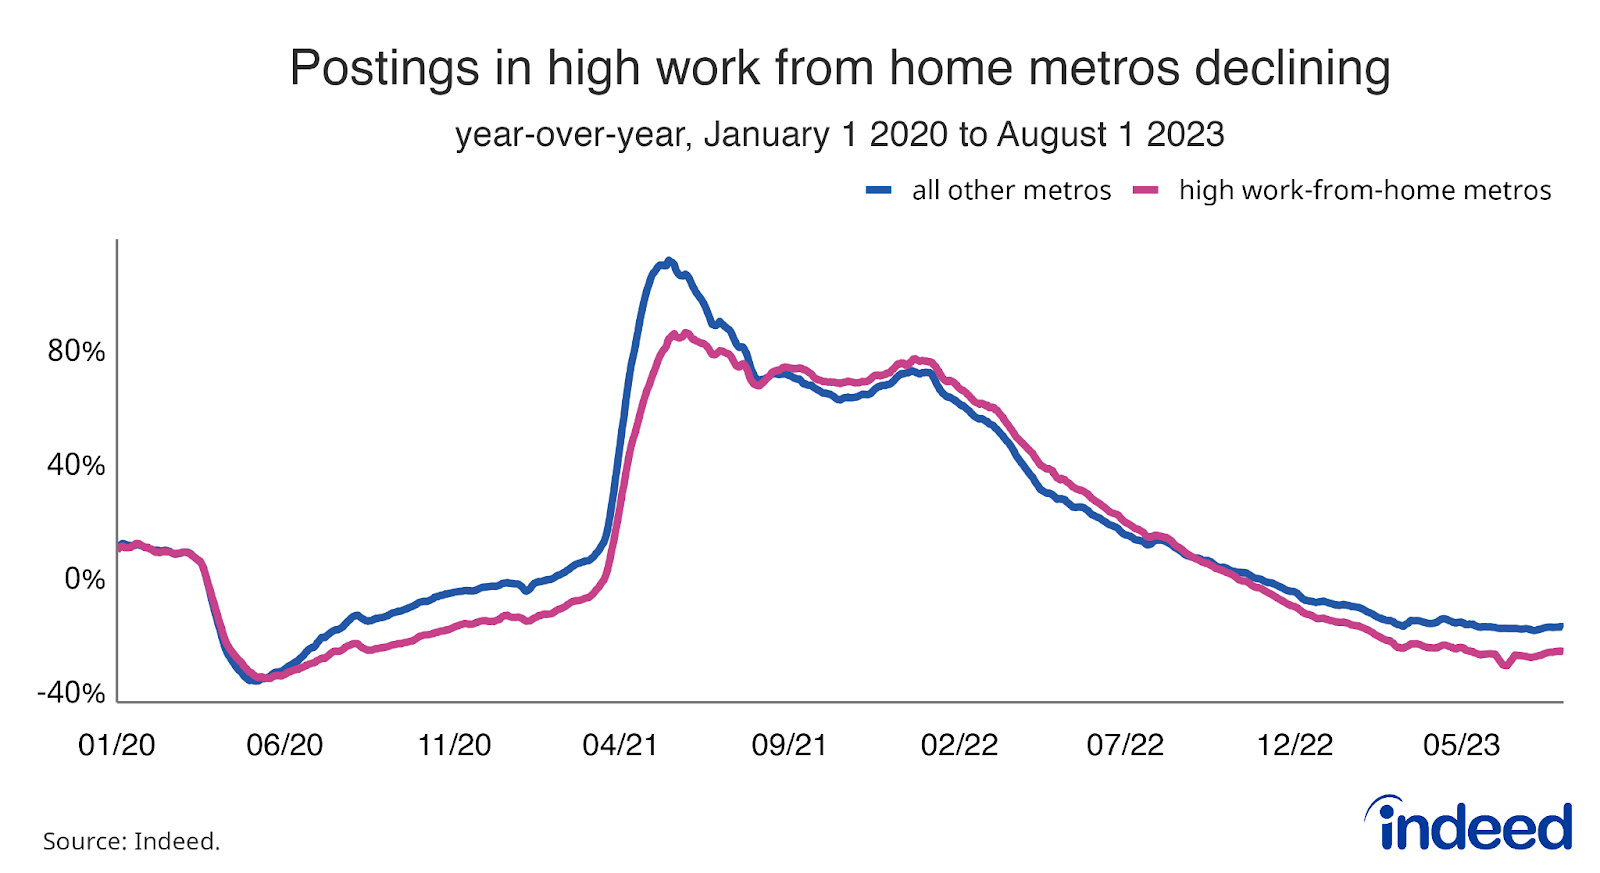 Line graph titled “Postings in high work from home metros declining.” With a vertical axis ranging from -40 to 80, it shows the year-over-year Indeed Job Postings for high work-from-home metros relative to all other metros. High work-from-home metros are declining the fastest.